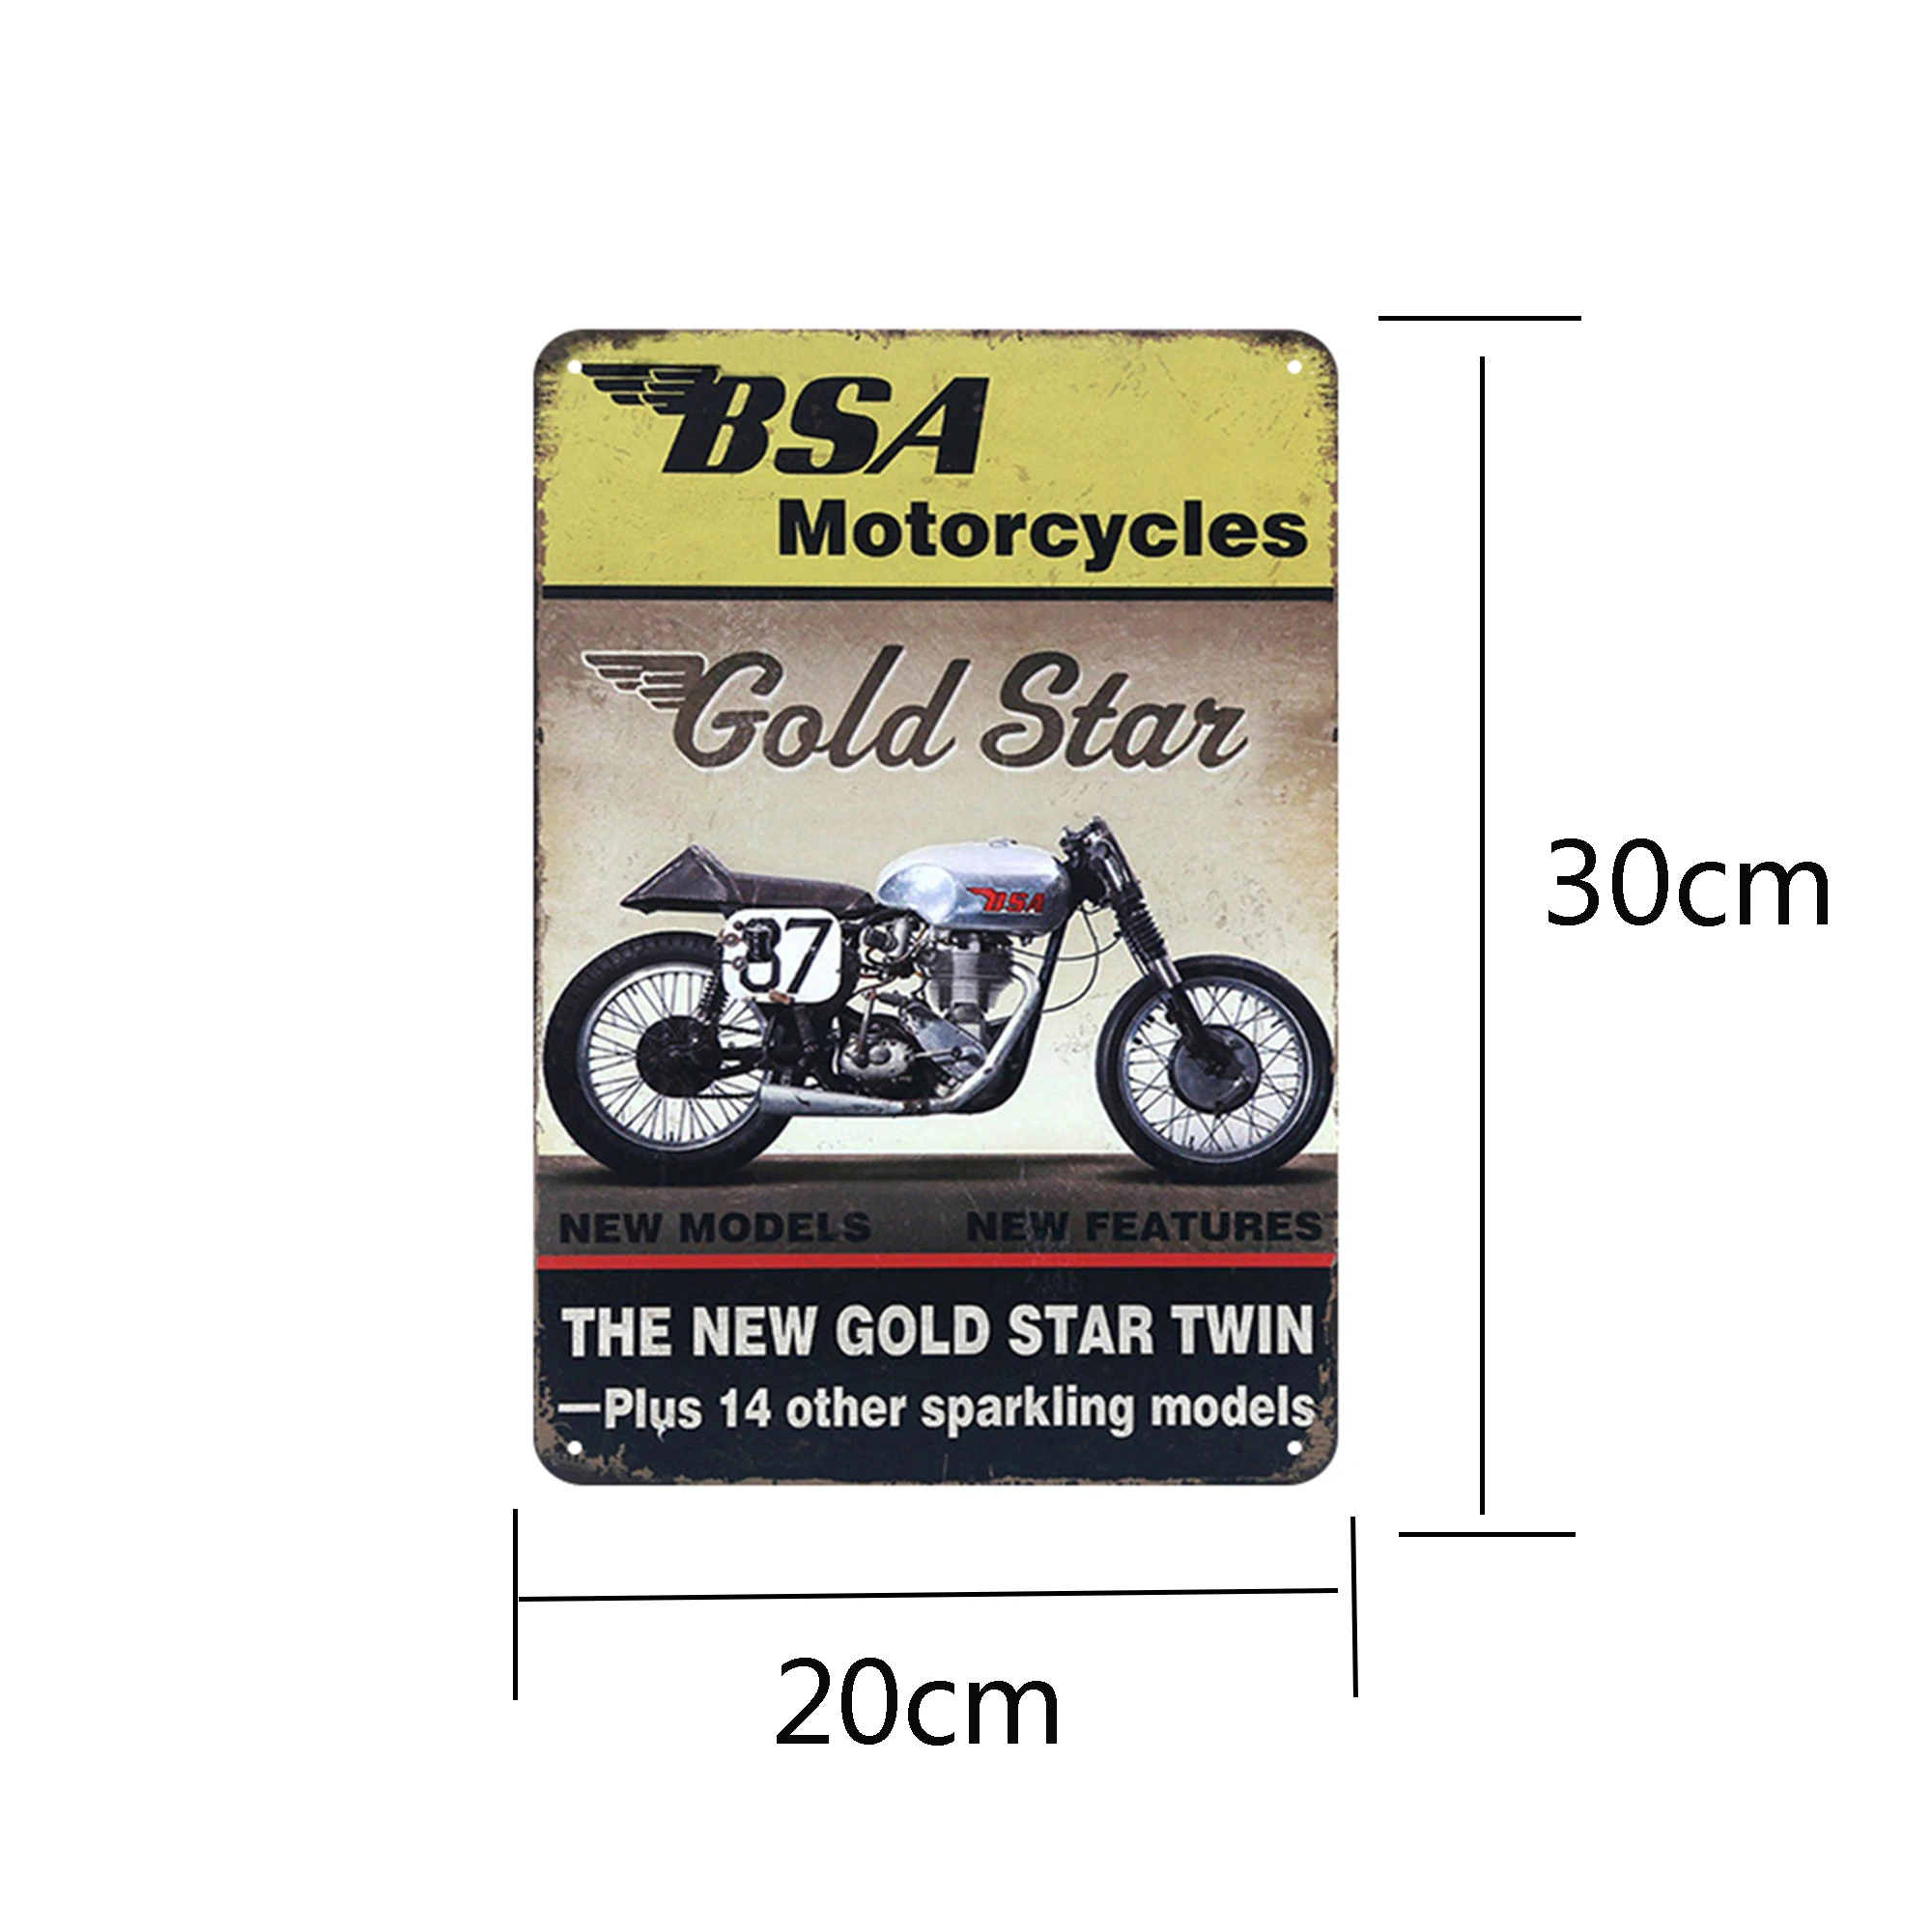 METAL VINTAGE ADVERTISING SIGN GARAGE WALL PLAQUE BSA MOTORCYCLES GOLD STAR 